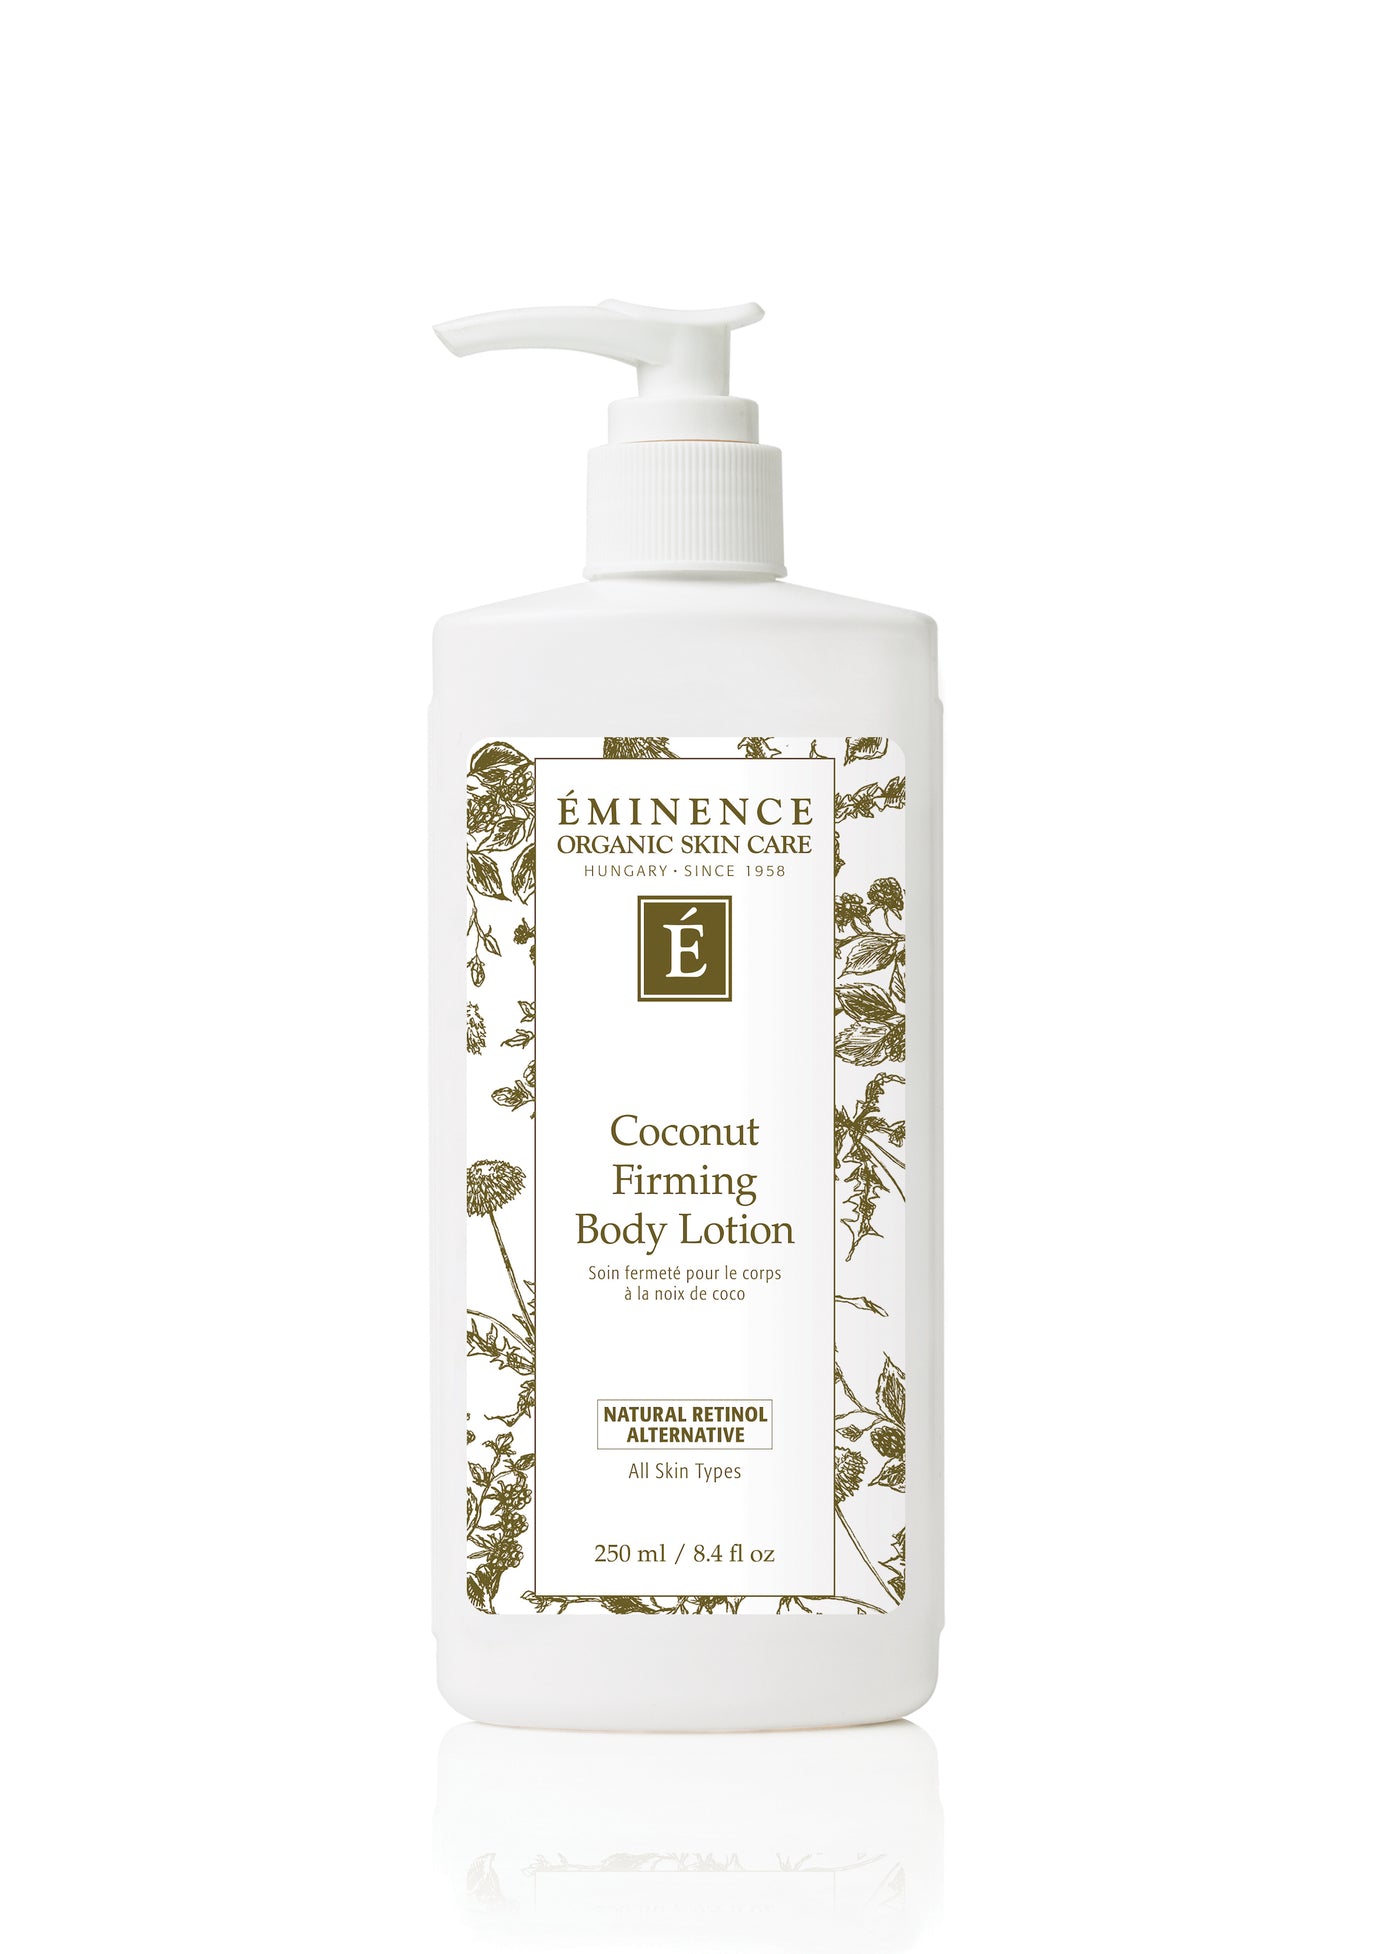 Eminence Organics Coconut Firming Body Lotion - Radiance Clean Beauty